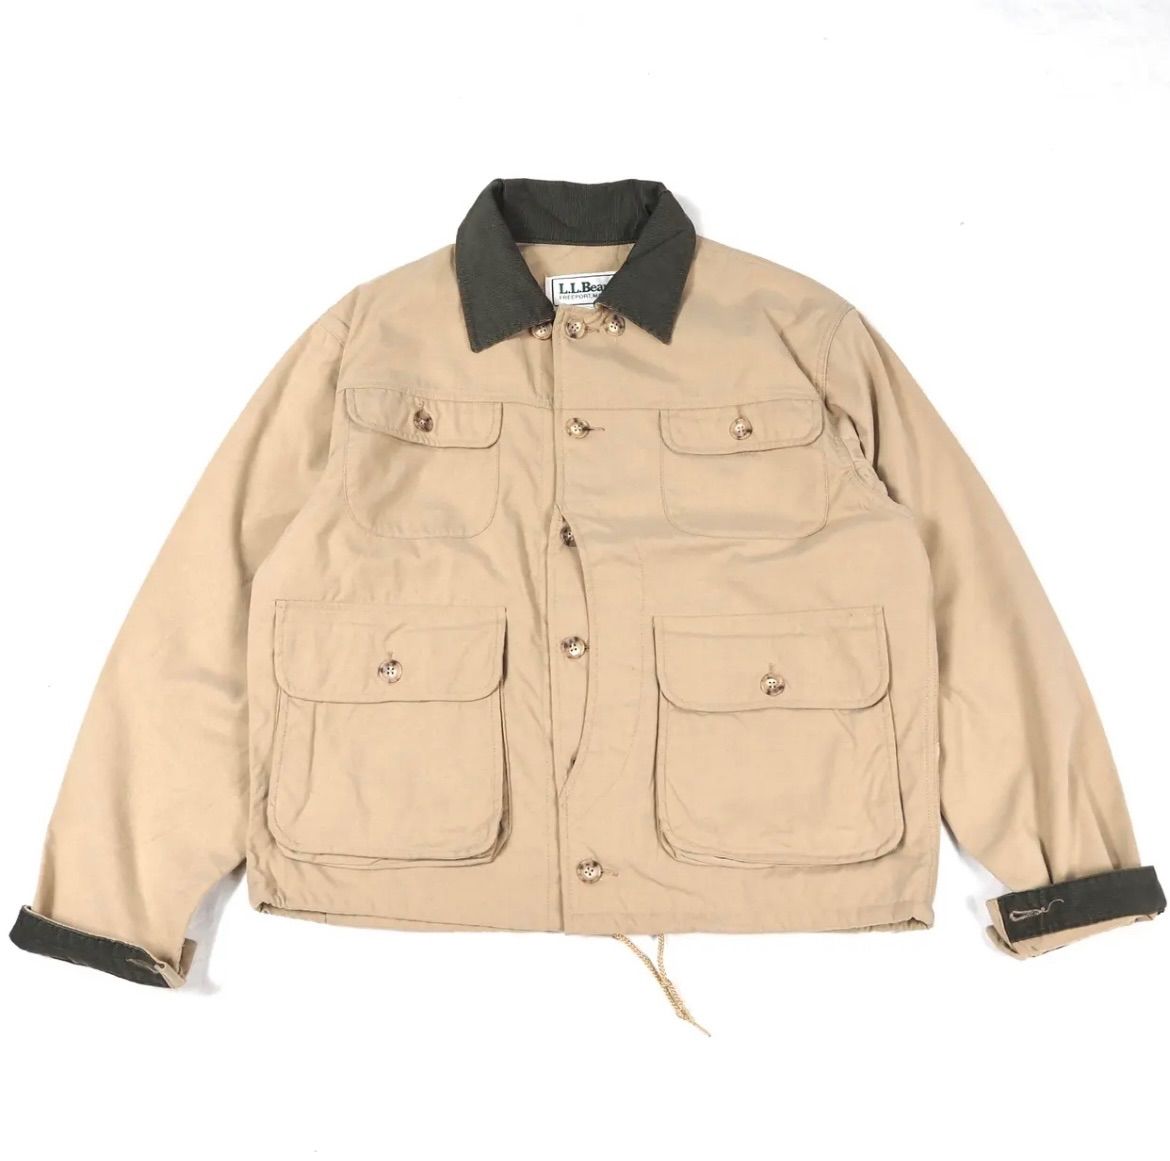 80s L.L.Bean【ハーフムーンポケット】FOREST KEEPER JACKET M 